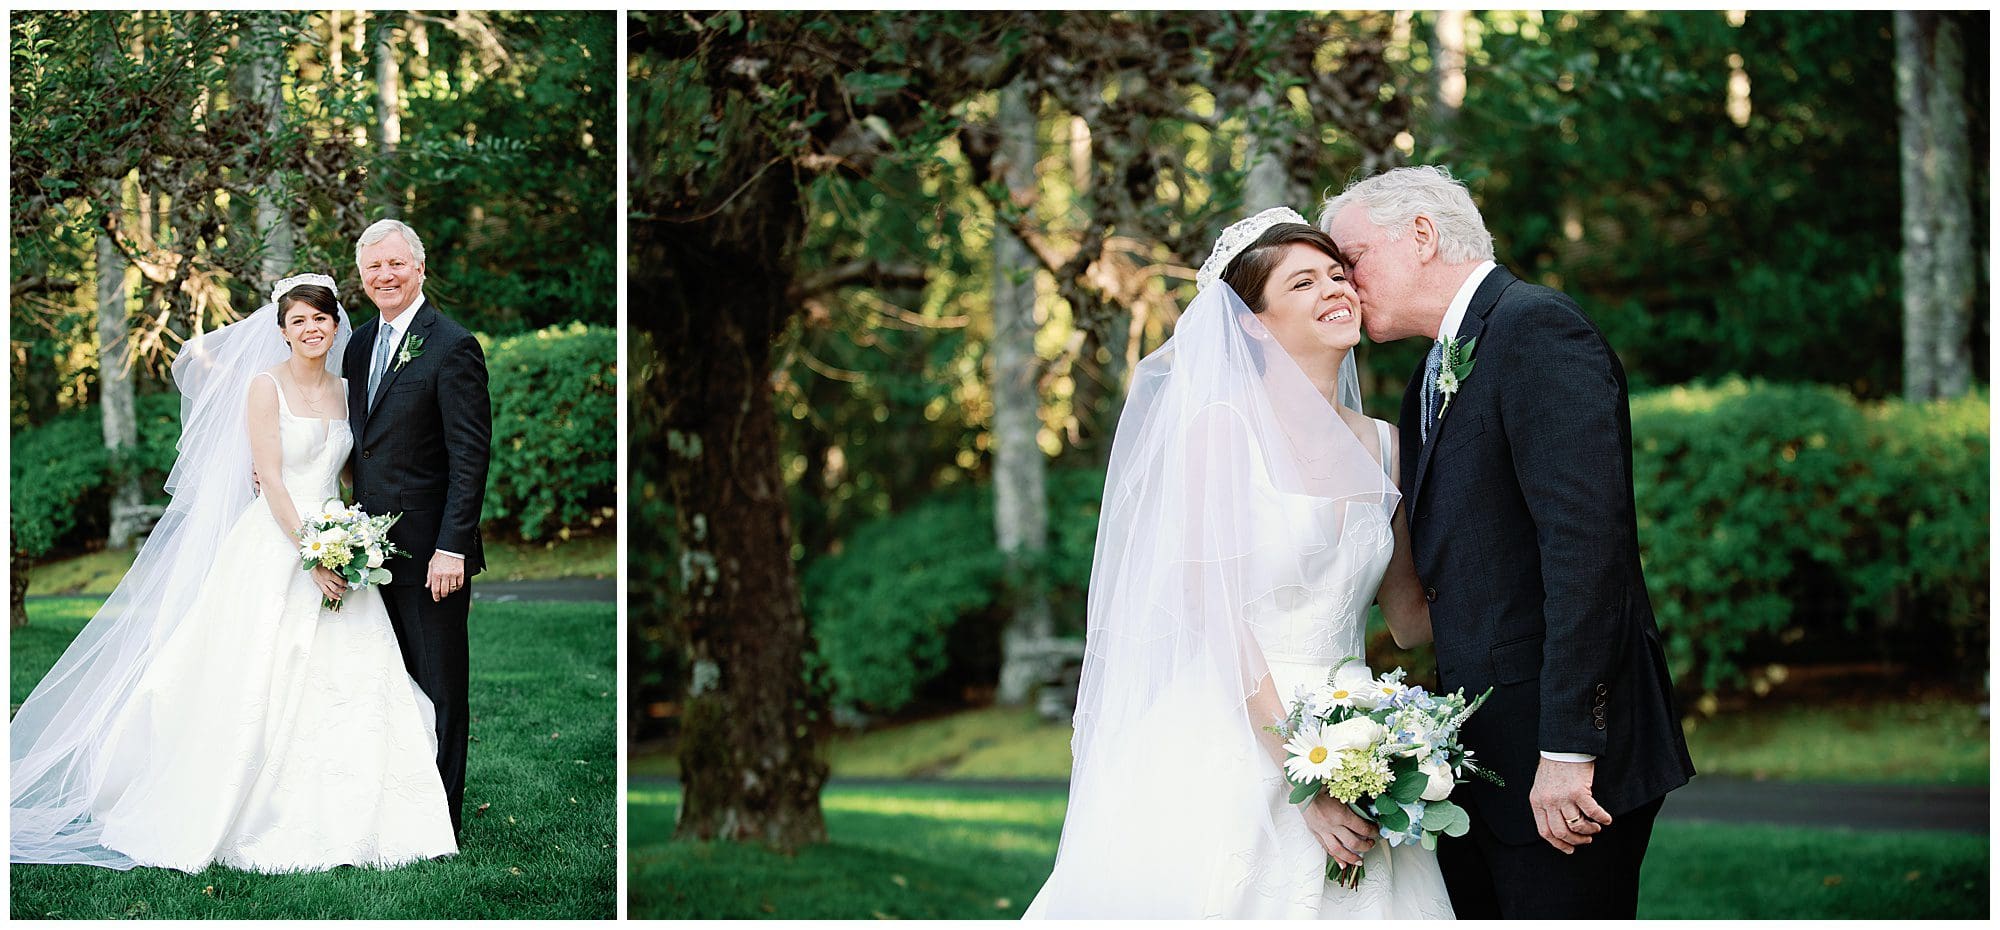 A bride and her father kiss in front of a tree.